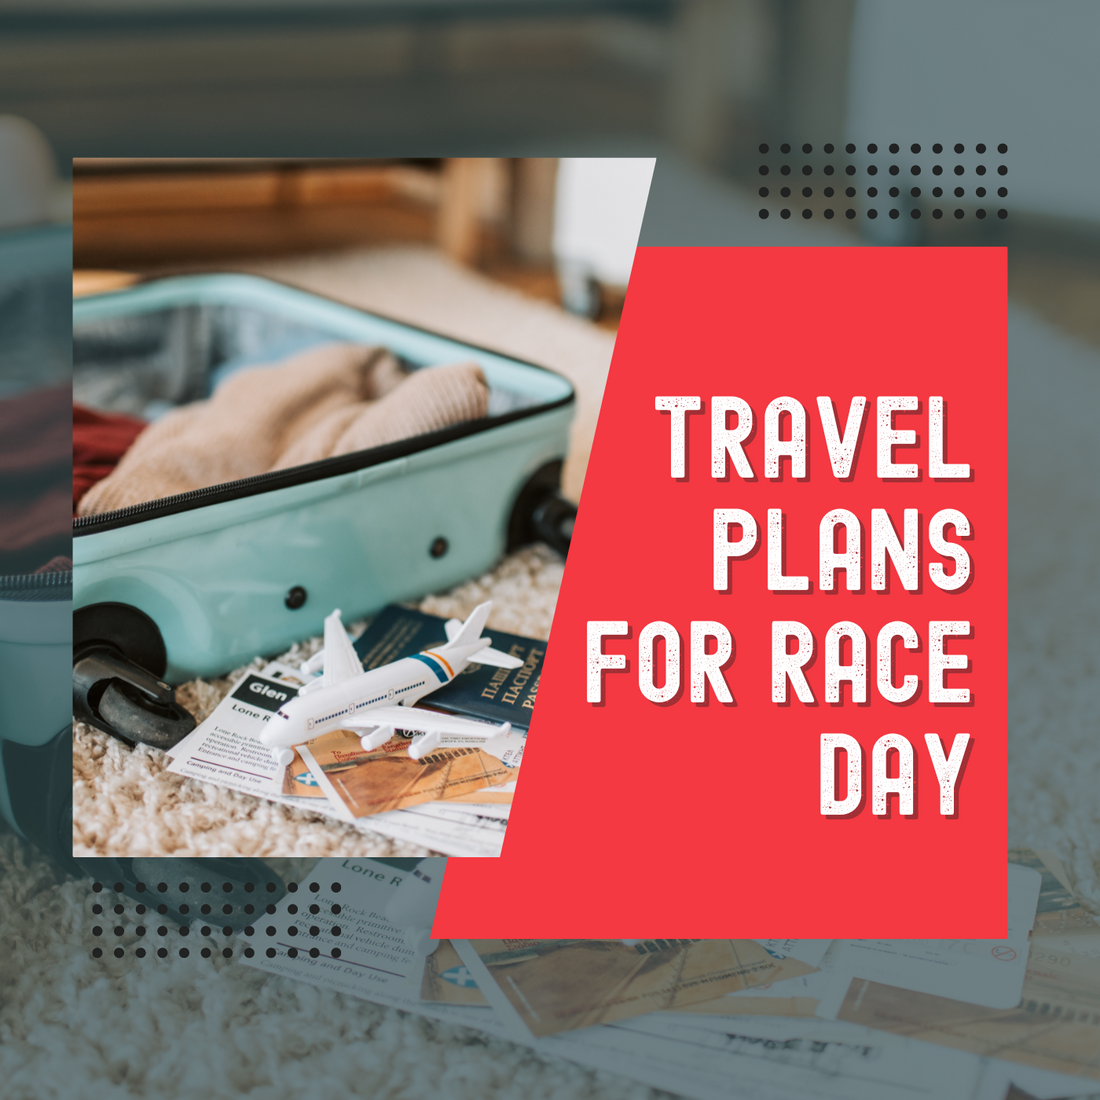 Travel to races and being set up to race them